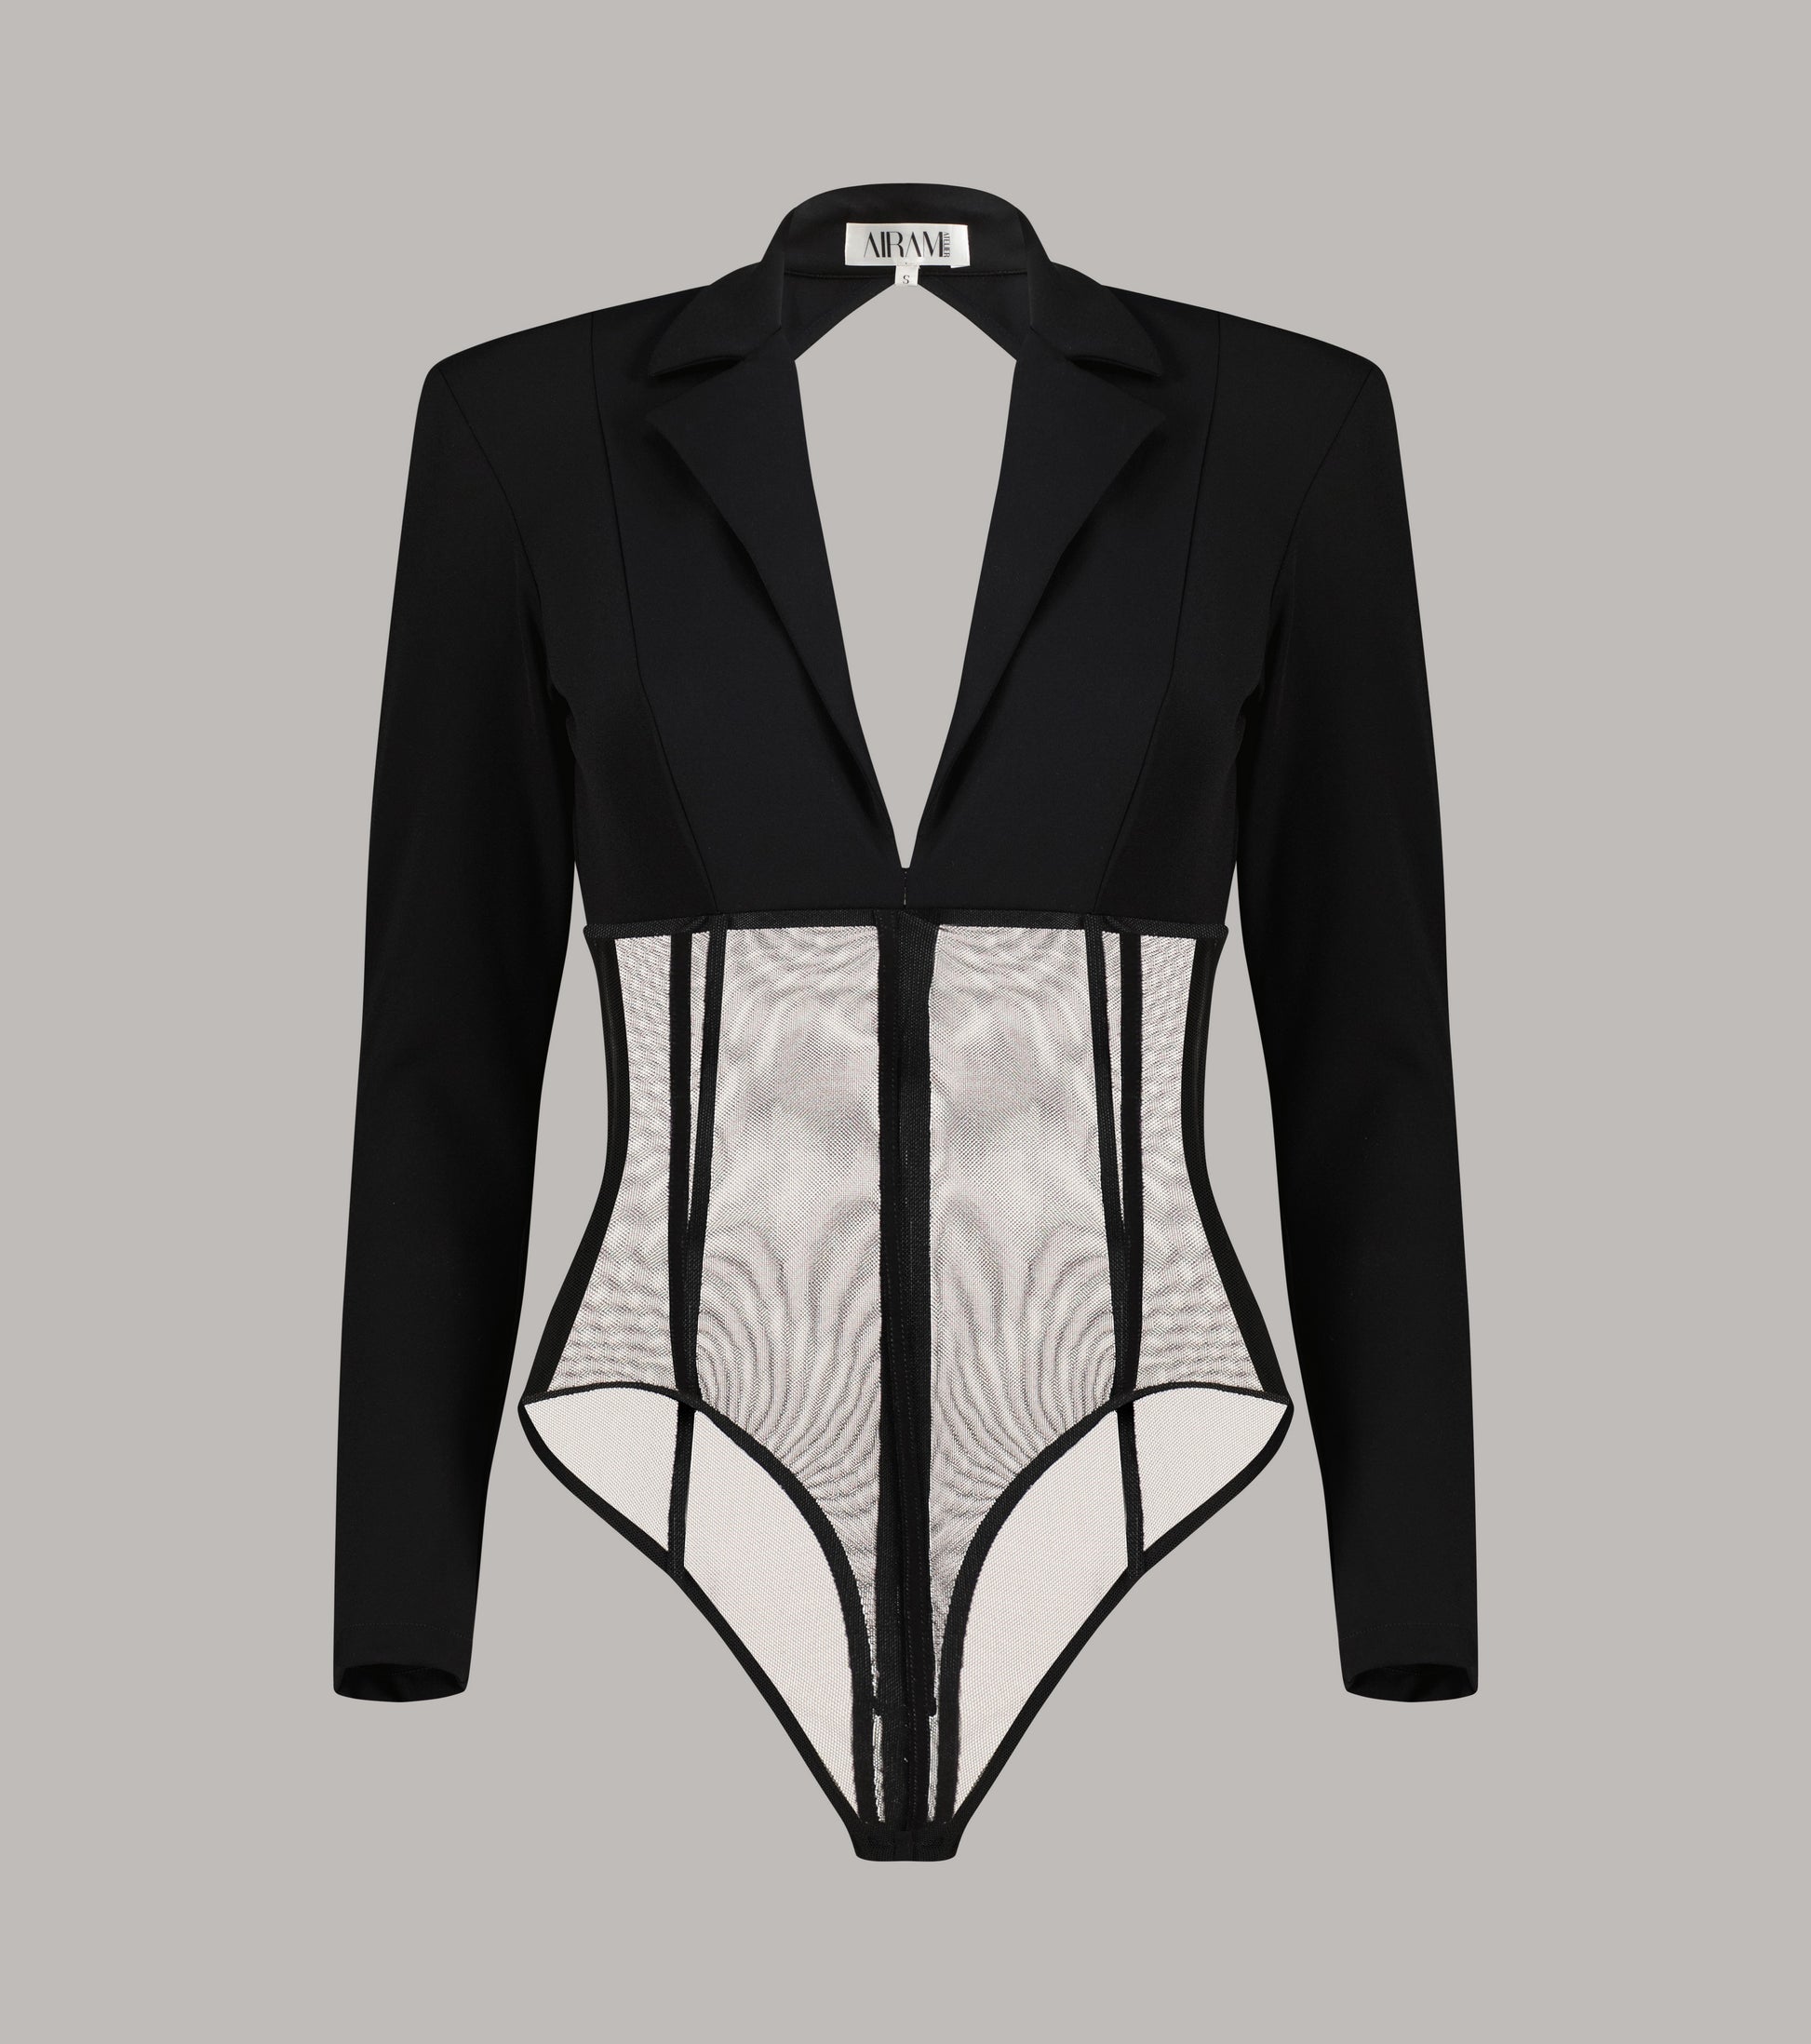 Chic At Every Age Featuring An Amazing Over-Sized Blazer  Lace bodysuit  outfit, Body suit outfits, Black lace bodysuit